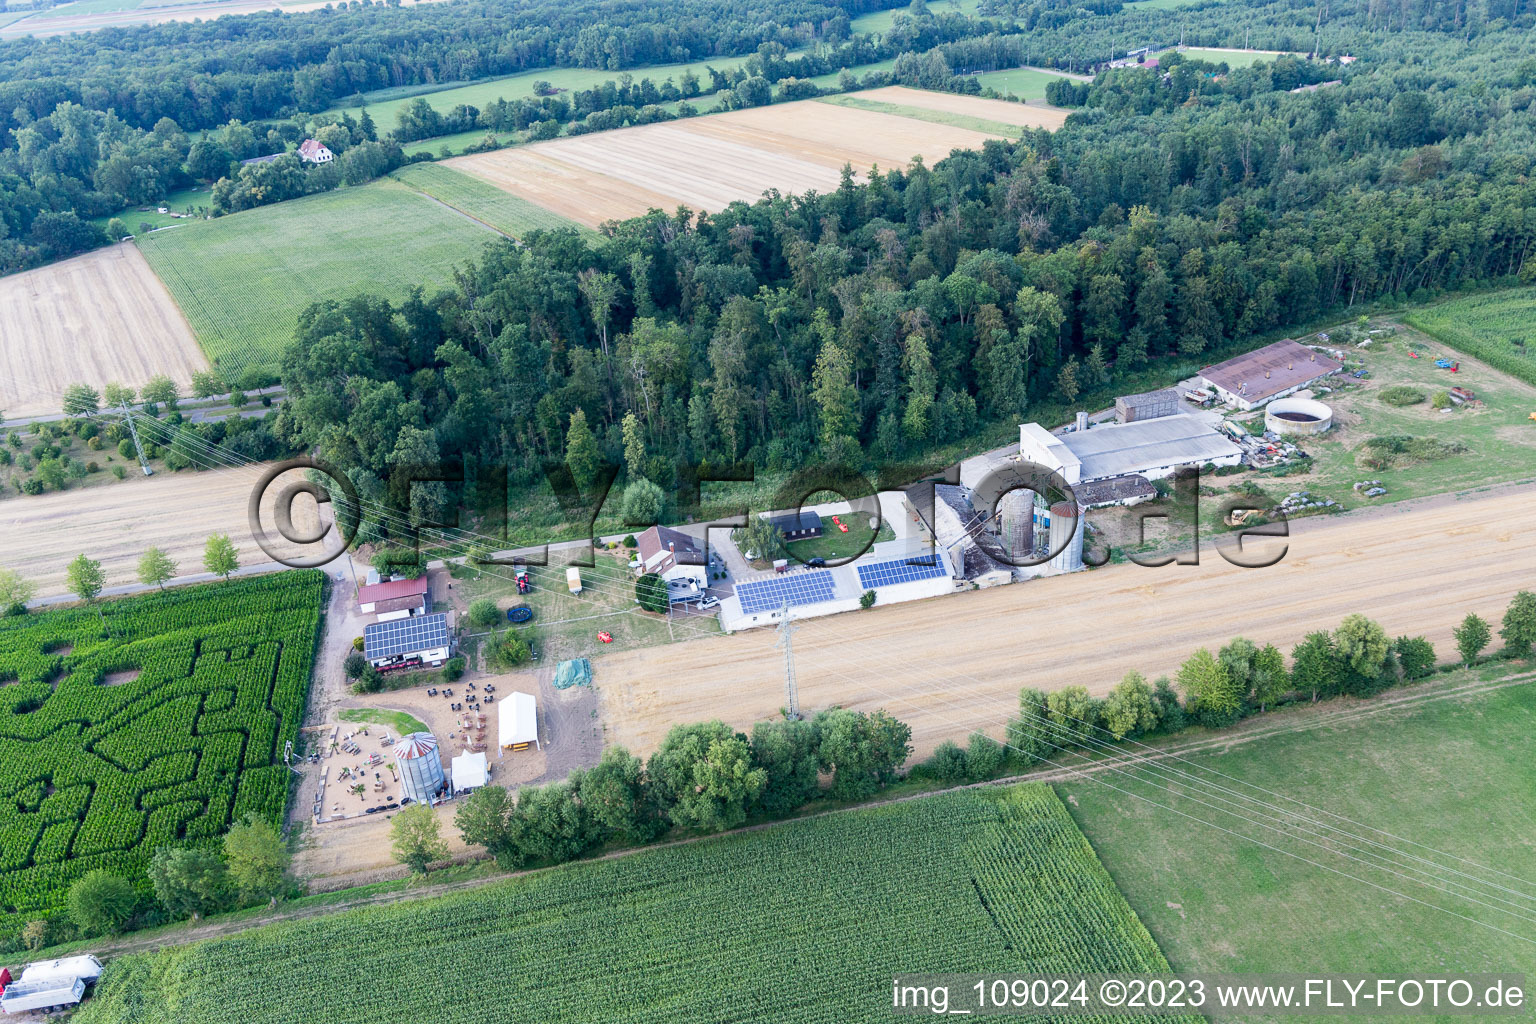 Corn maze at Seehof in Steinweiler in the state Rhineland-Palatinate, Germany from above